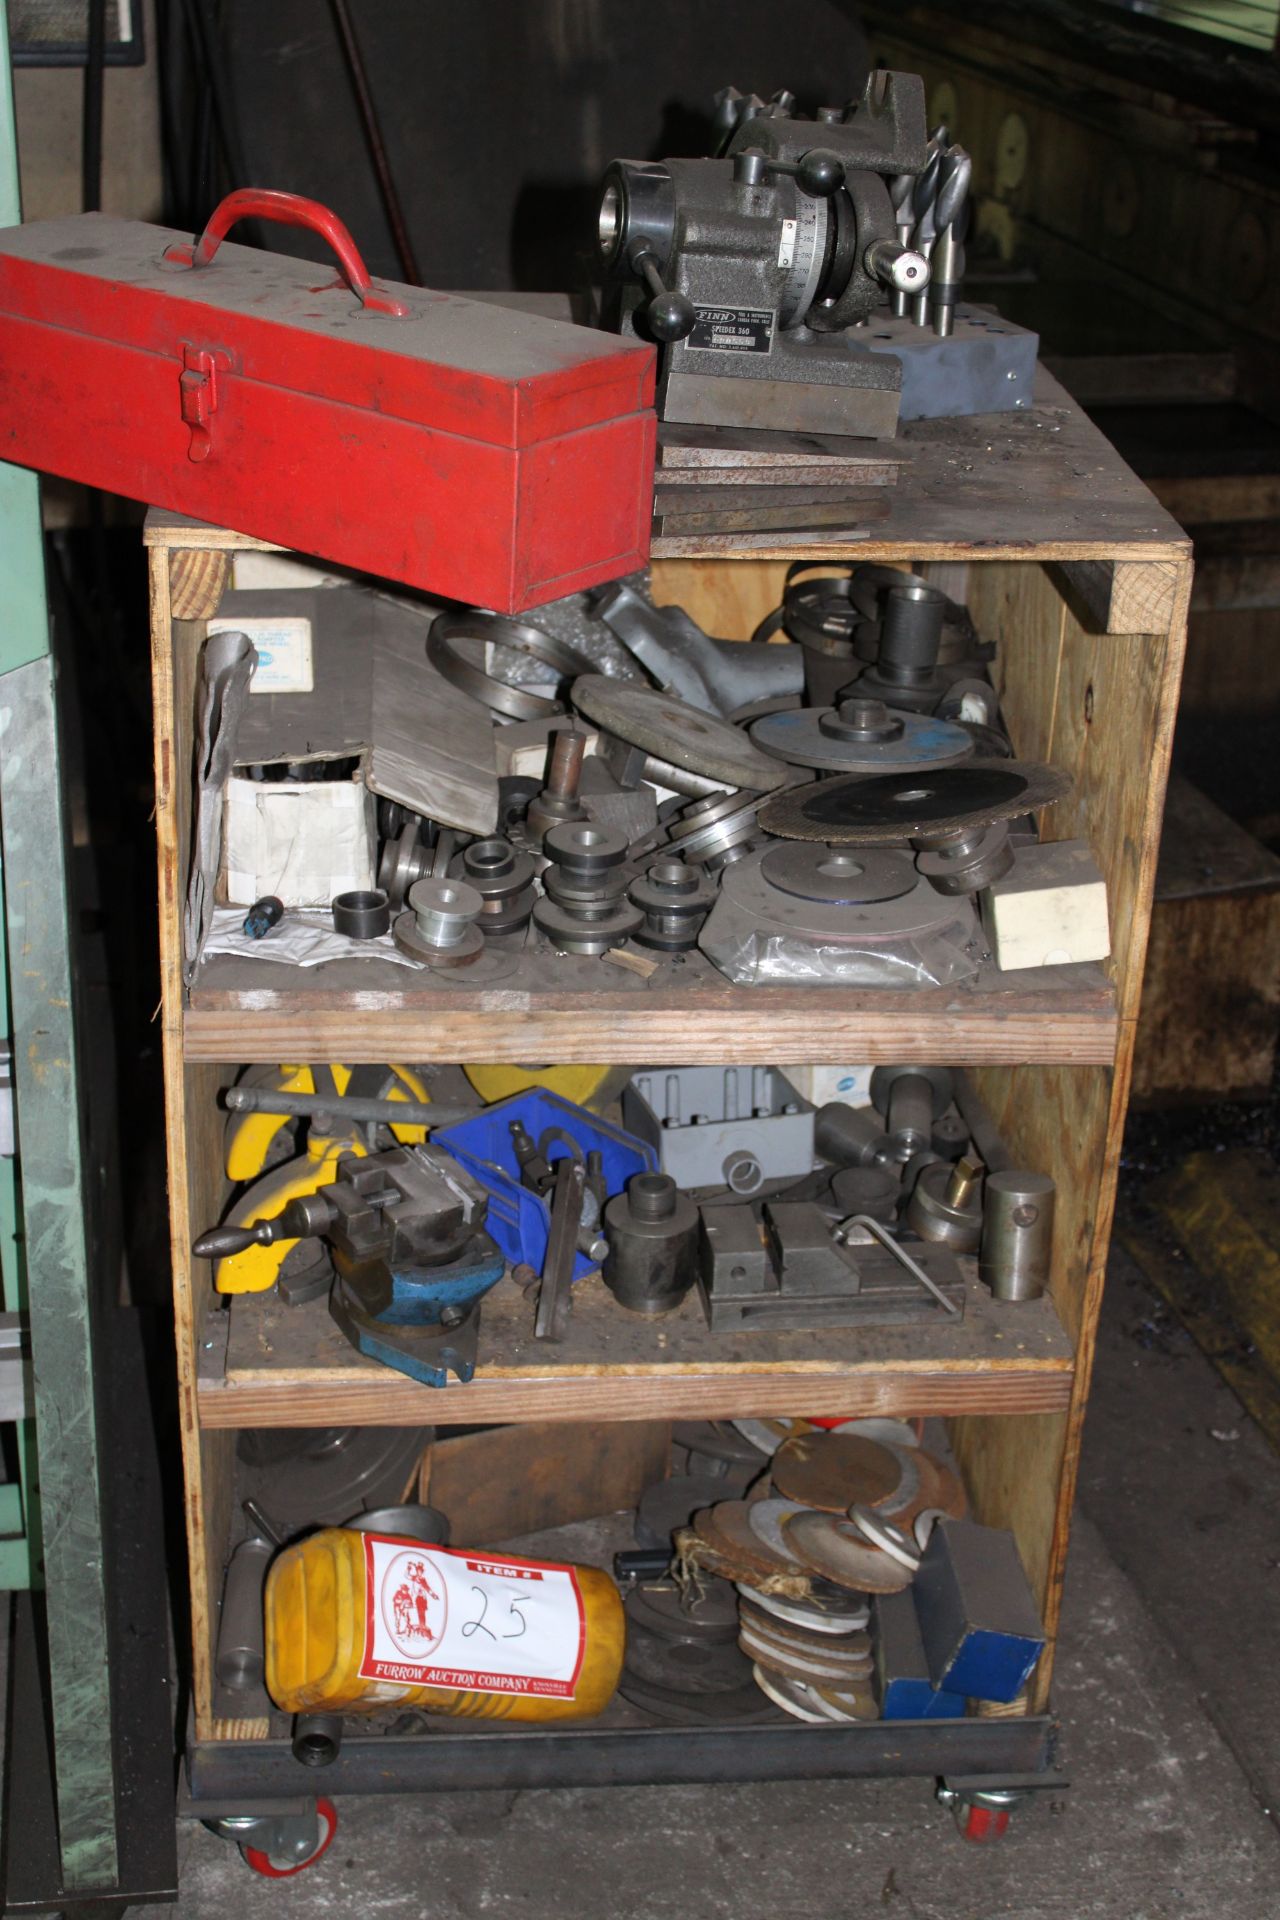 Contents of Shelf: Misc. Grinding Wheels, Grinding Wheel Hubs, Angle Vise, Precision Vise, Etc.